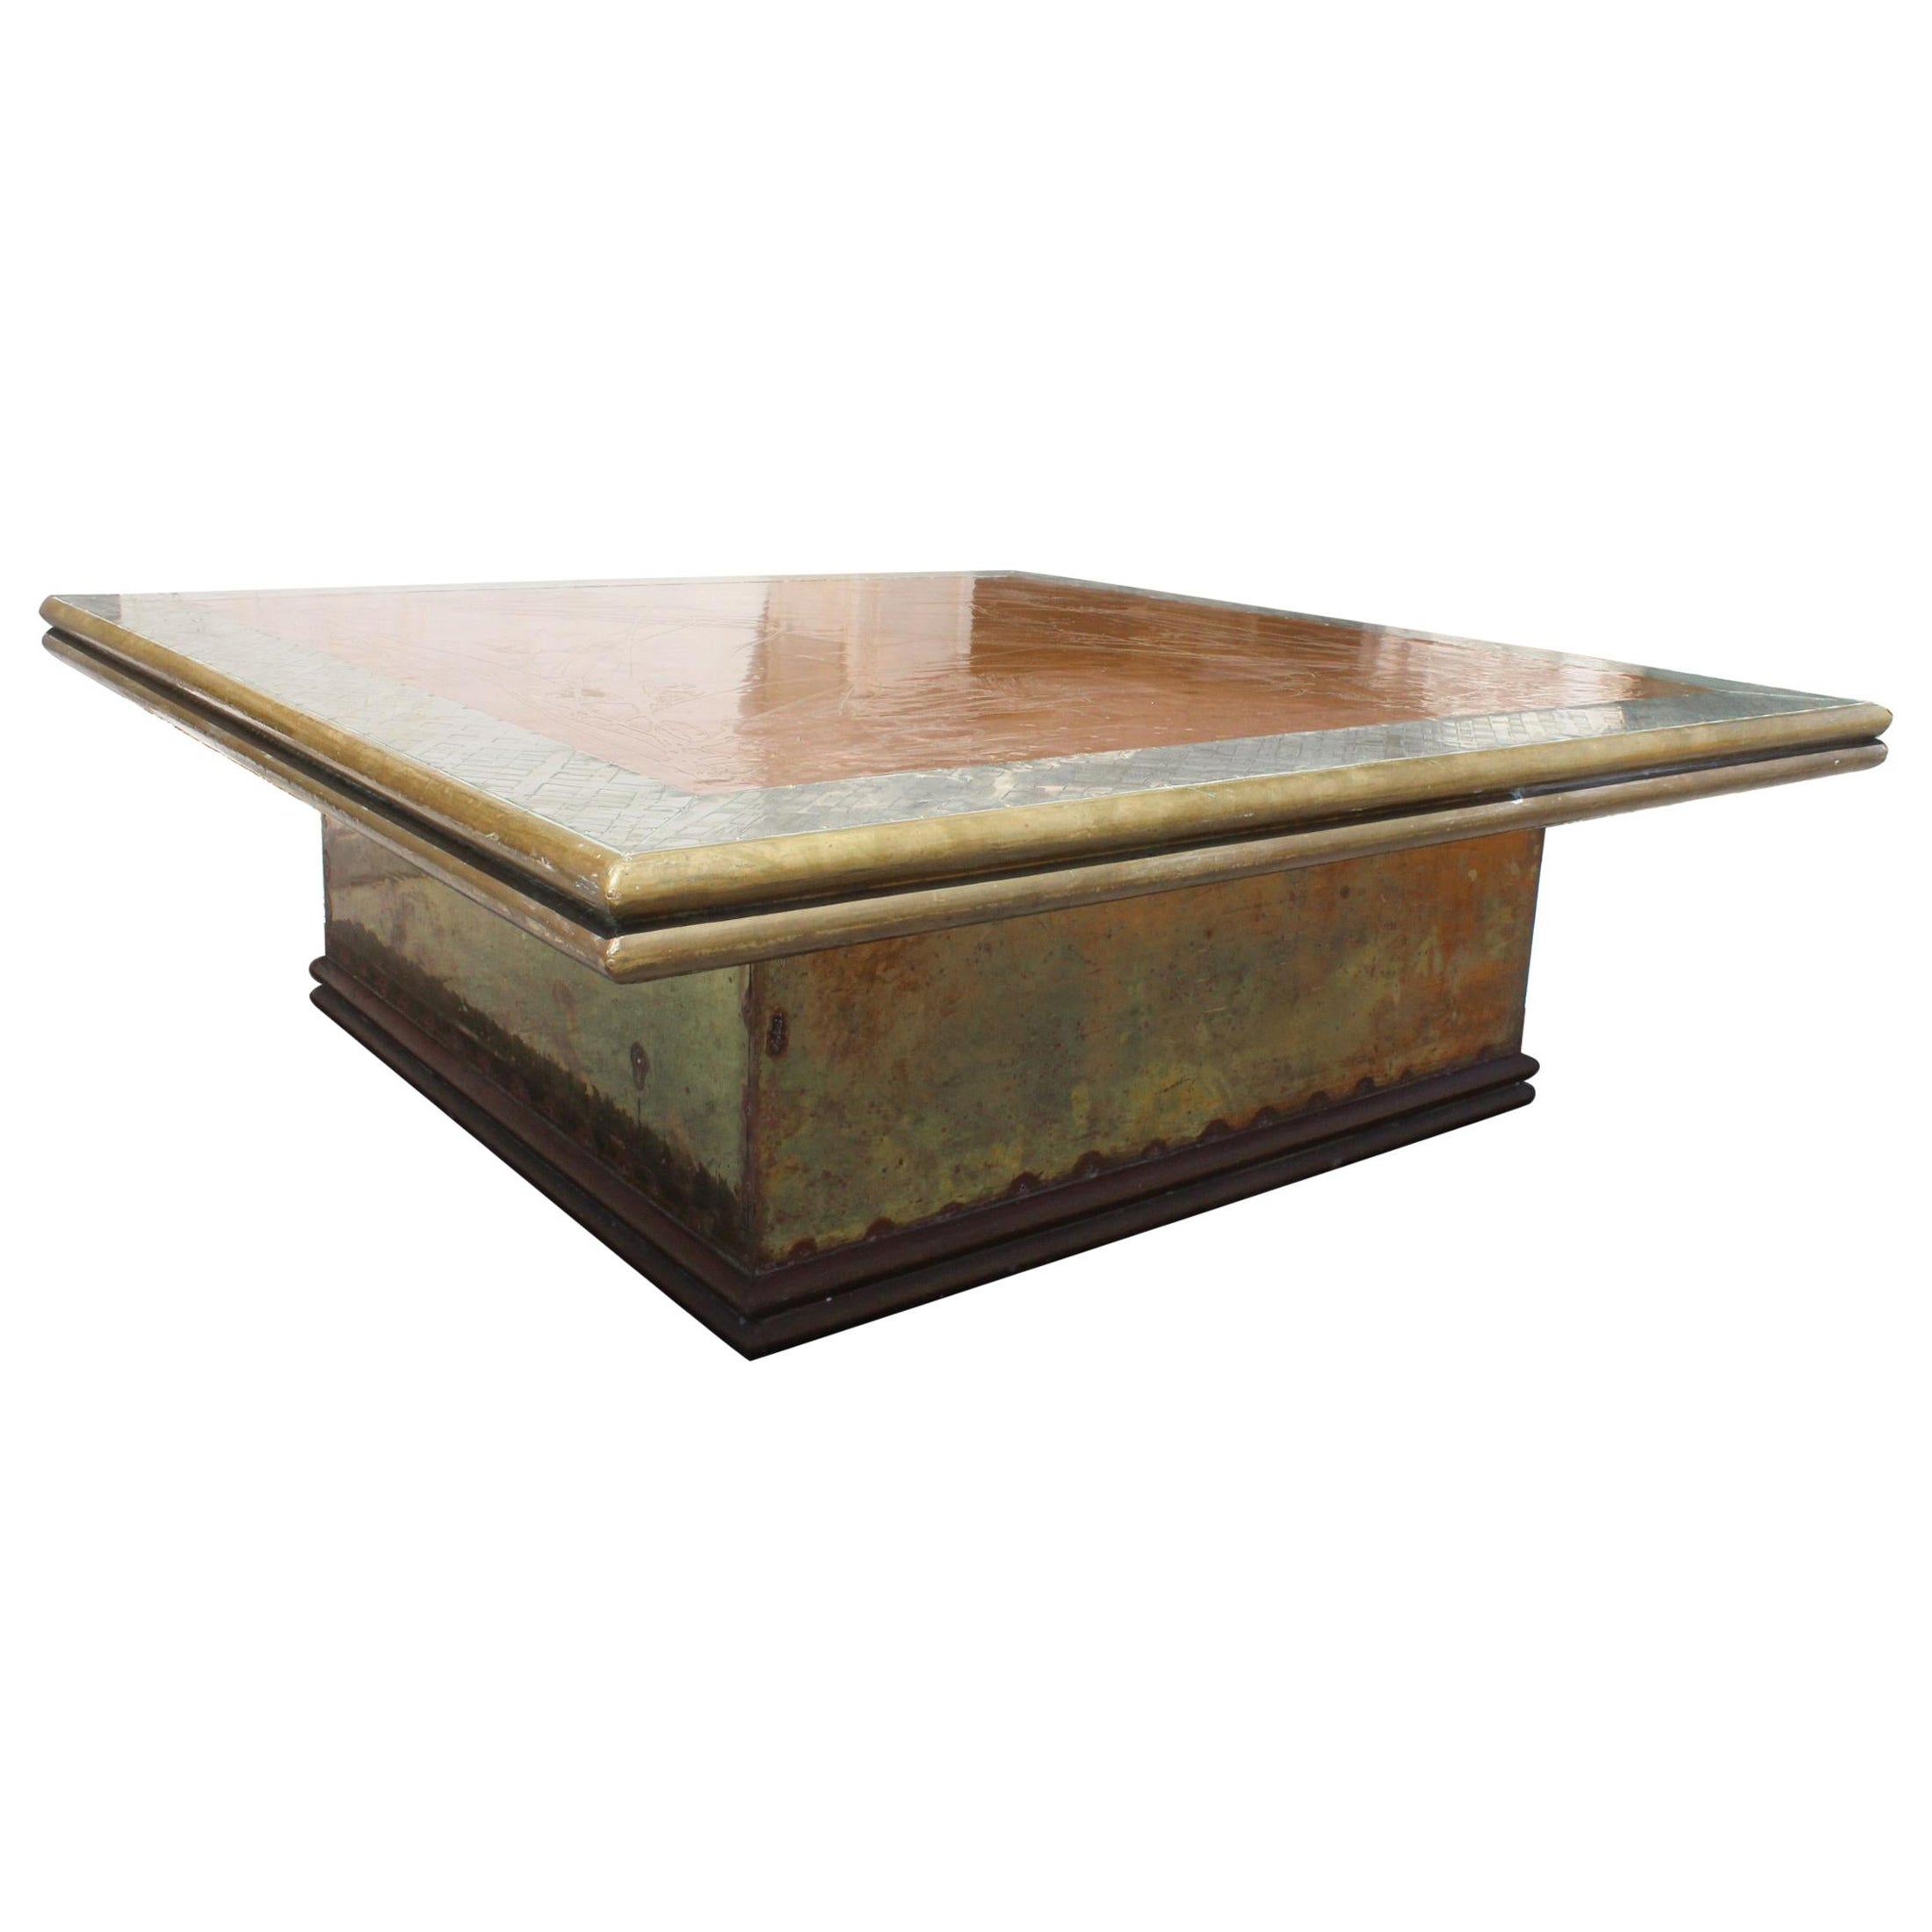 1980s Gilded Brass Rodolfo Dubarry Square Coffee Table Made in Spain